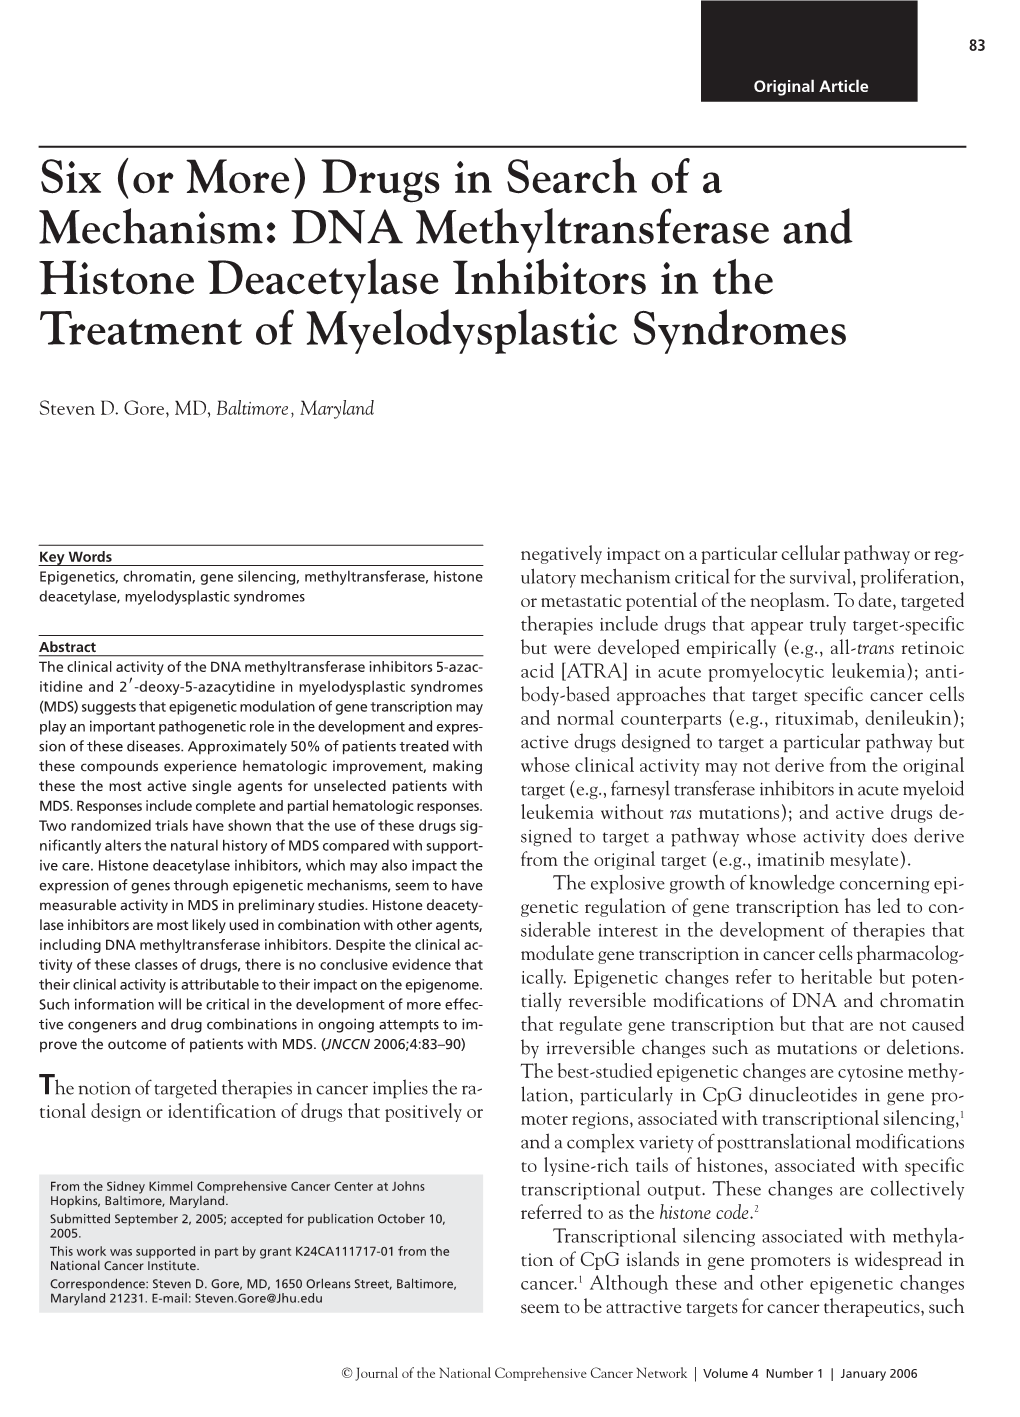 DNA Methyltransferase and Histone Deacetylase Inhibitors in the Treatment of Myelodysplastic Syndromes